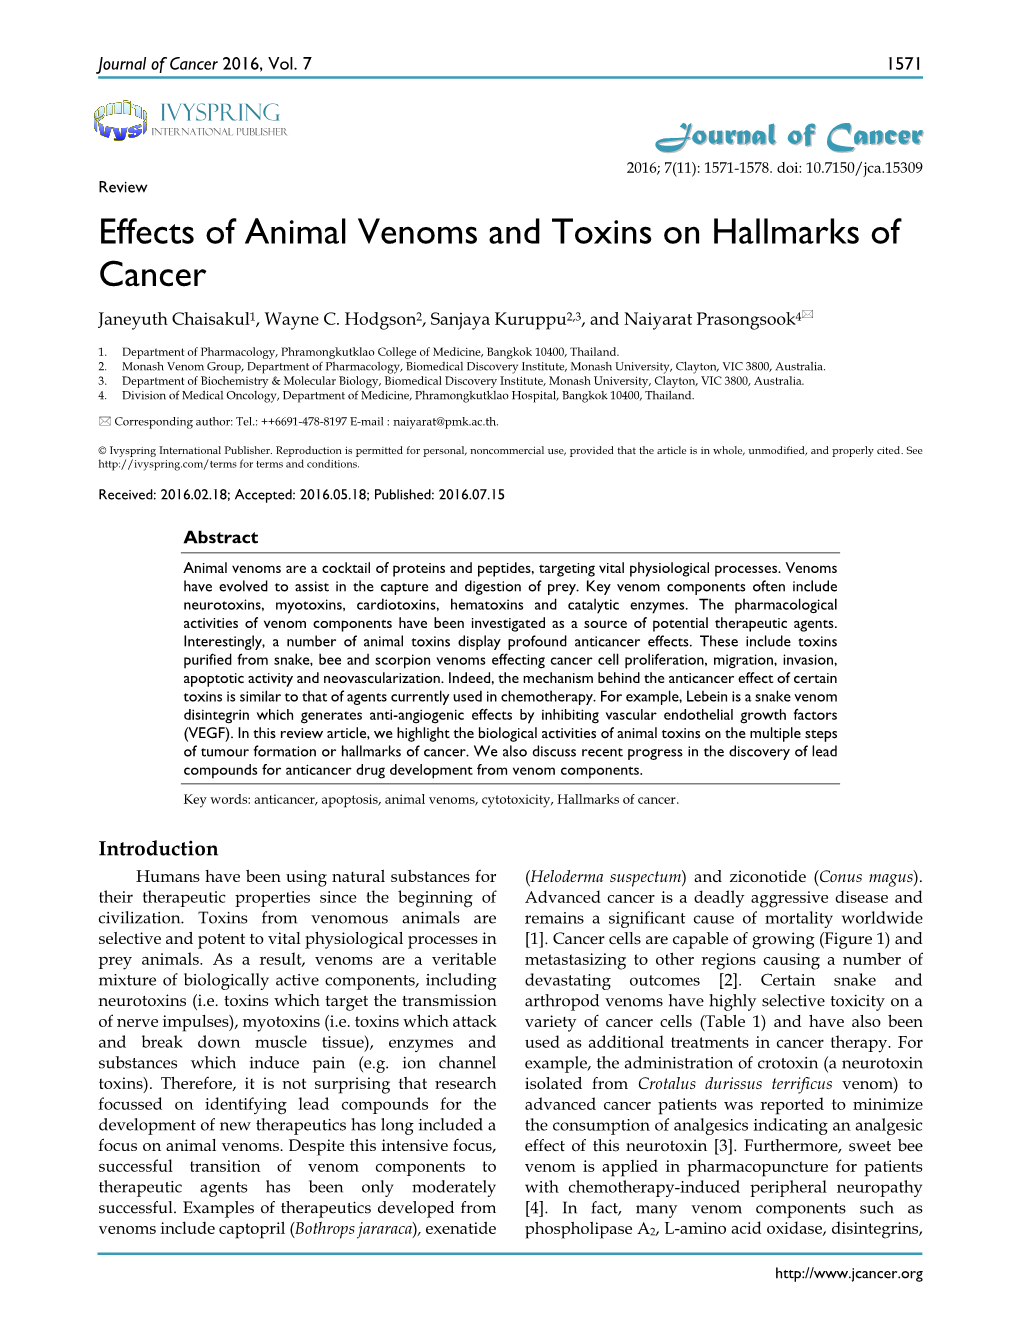 Effects of Animal Venoms and Toxins on Hallmarks of Cancer Janeyuth Chaisakul1, Wayne C